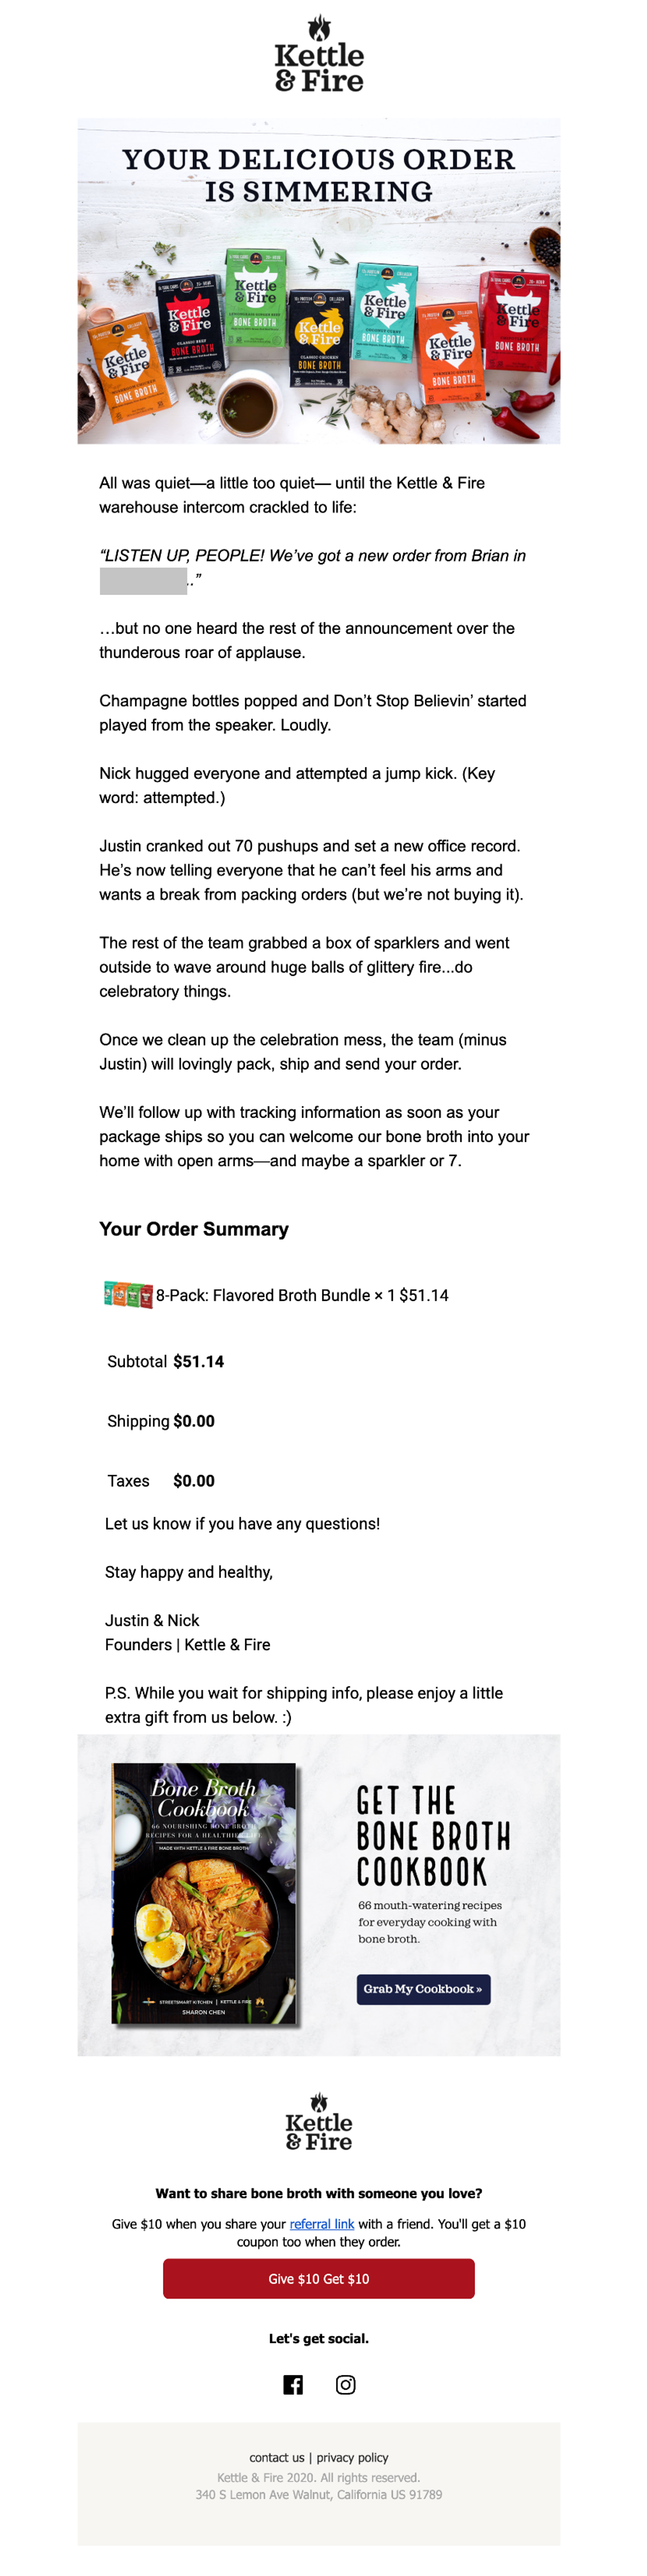 Kettle & Fire Order Confirmation Email Template screenshot